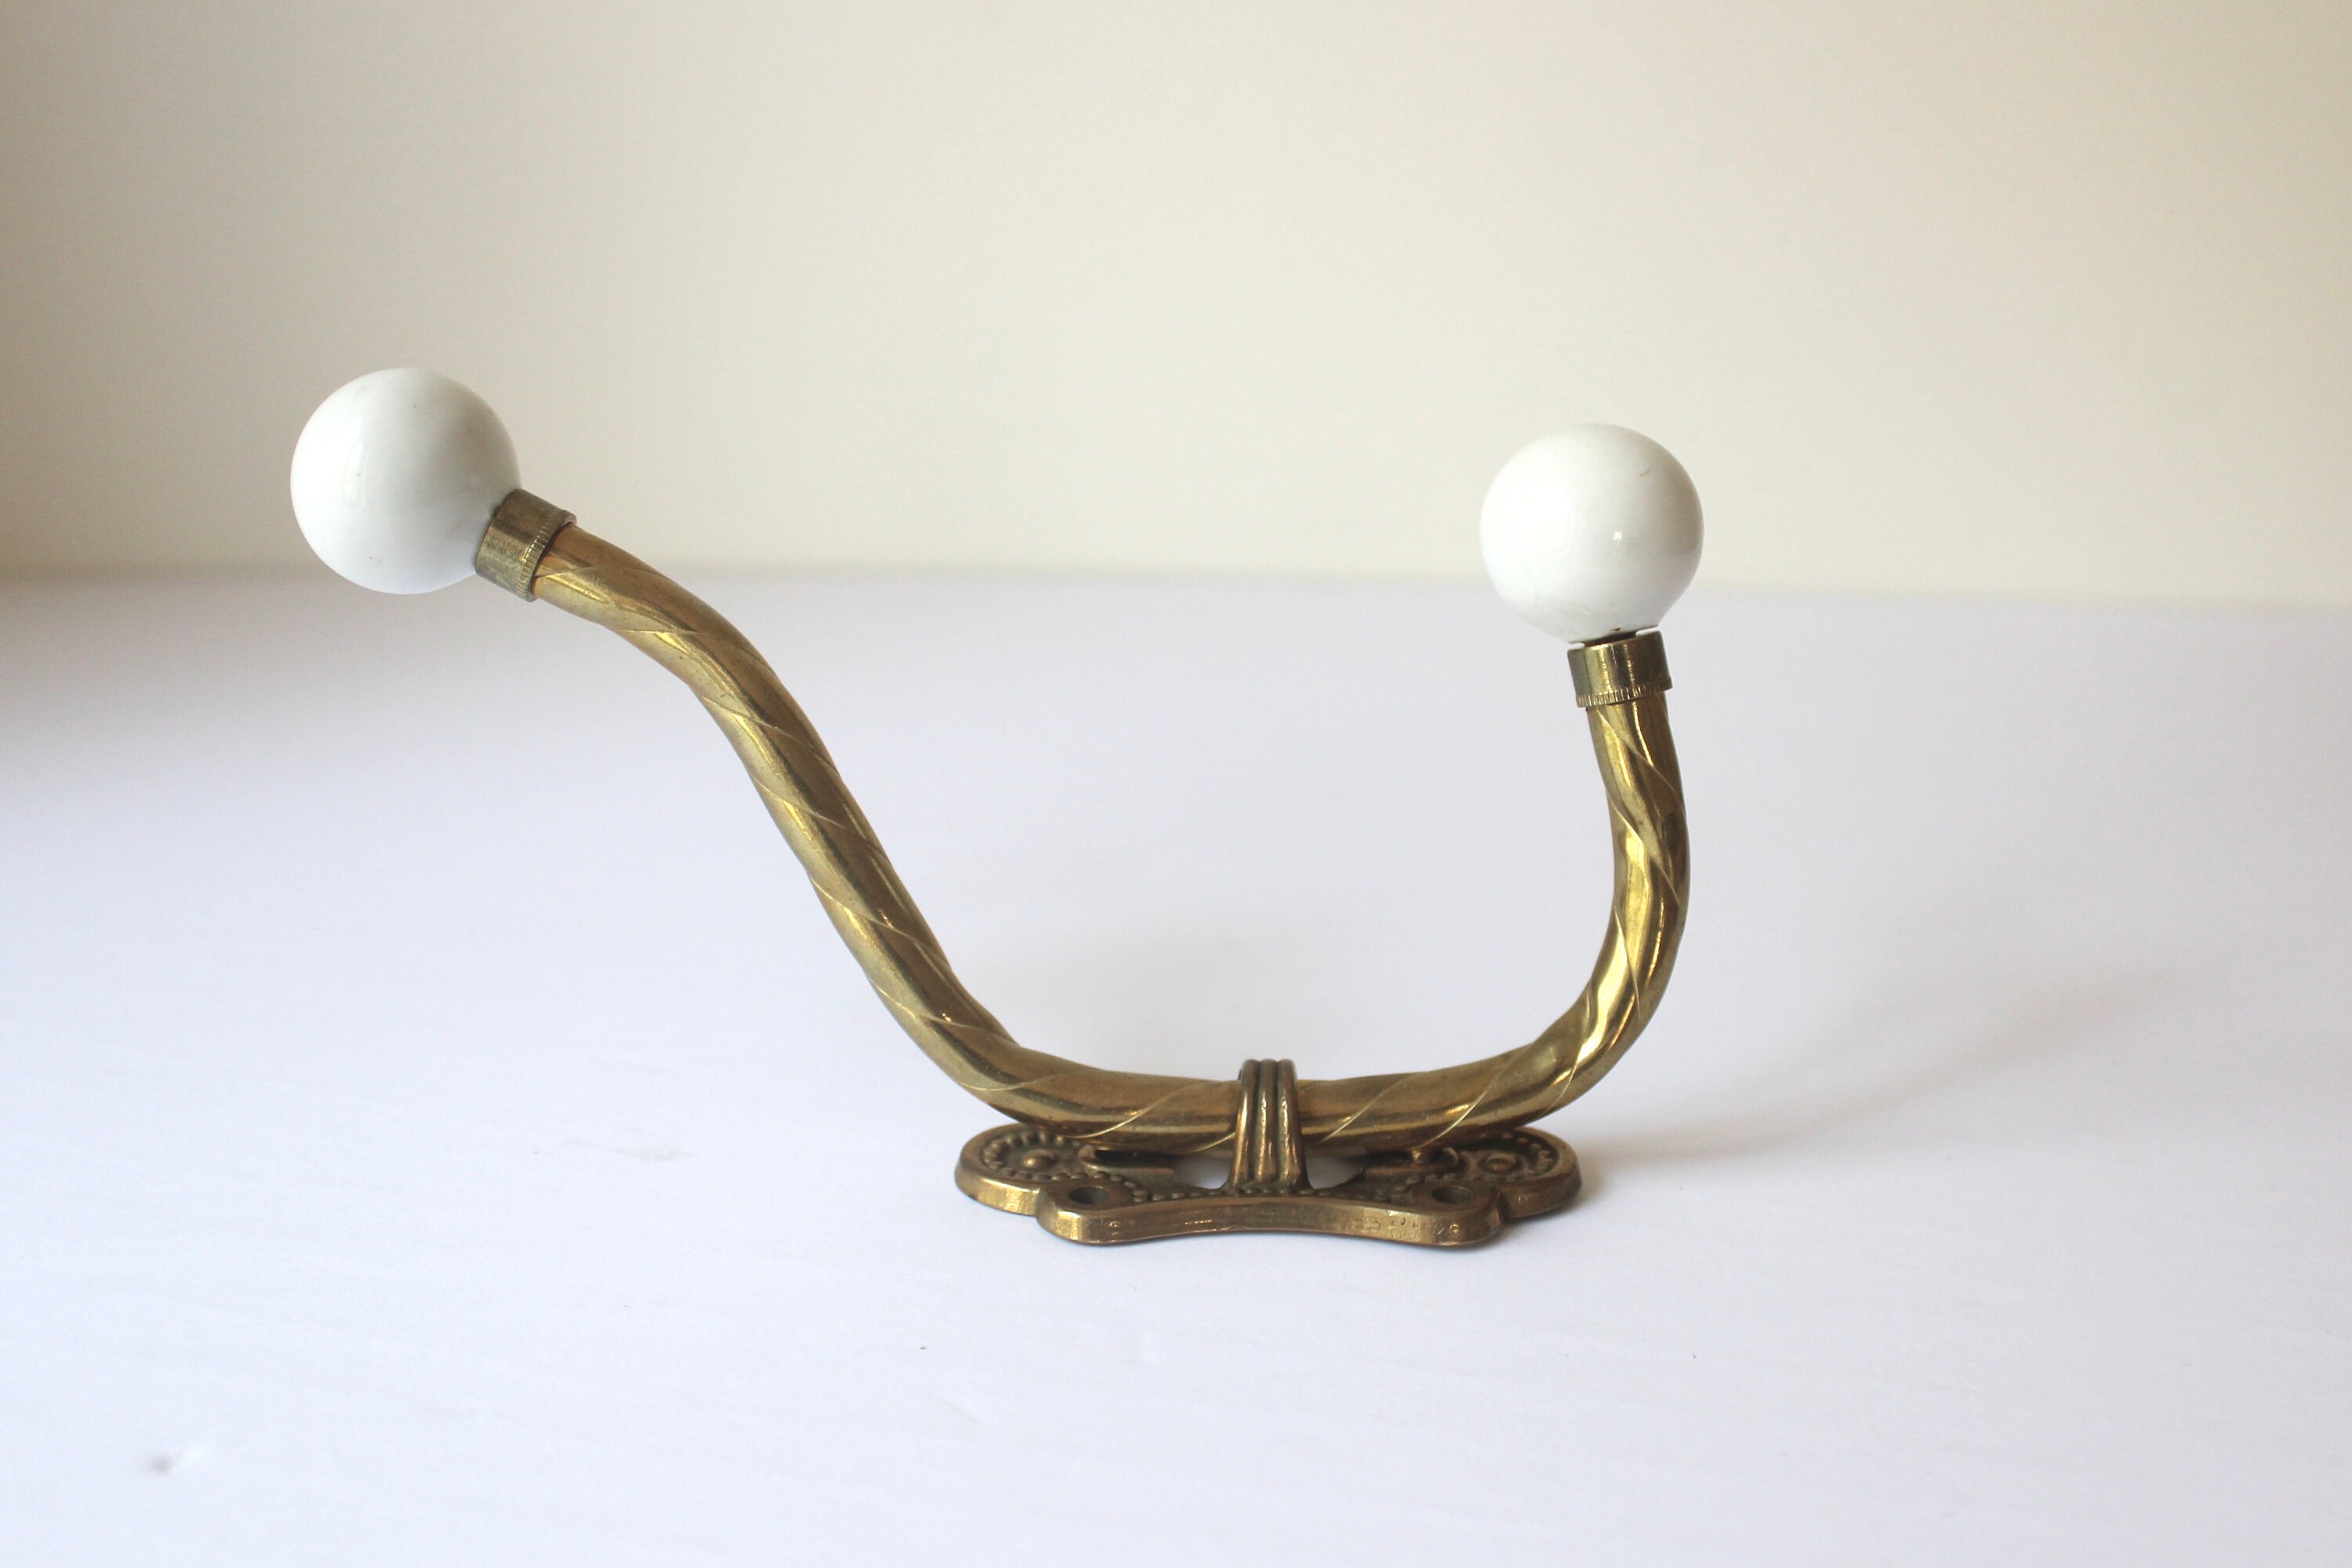 Clothes Hook Brass Ceramic Ball Tips Wall Mounted Double Hook Decorative Hanger 